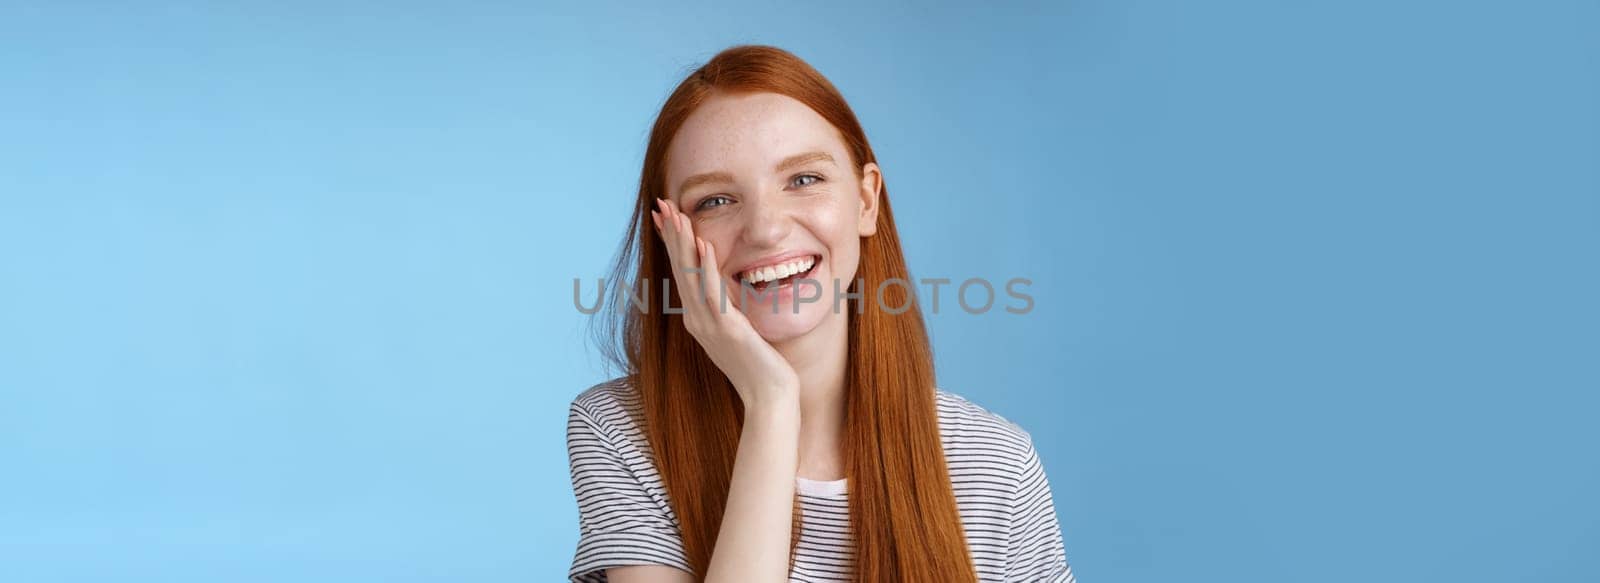 Charismatic talkative friendly-looking happy laughing redhead girl having fun discuss previous summer holidays make jokes chuckling touching face amused standing cheerful blue background.